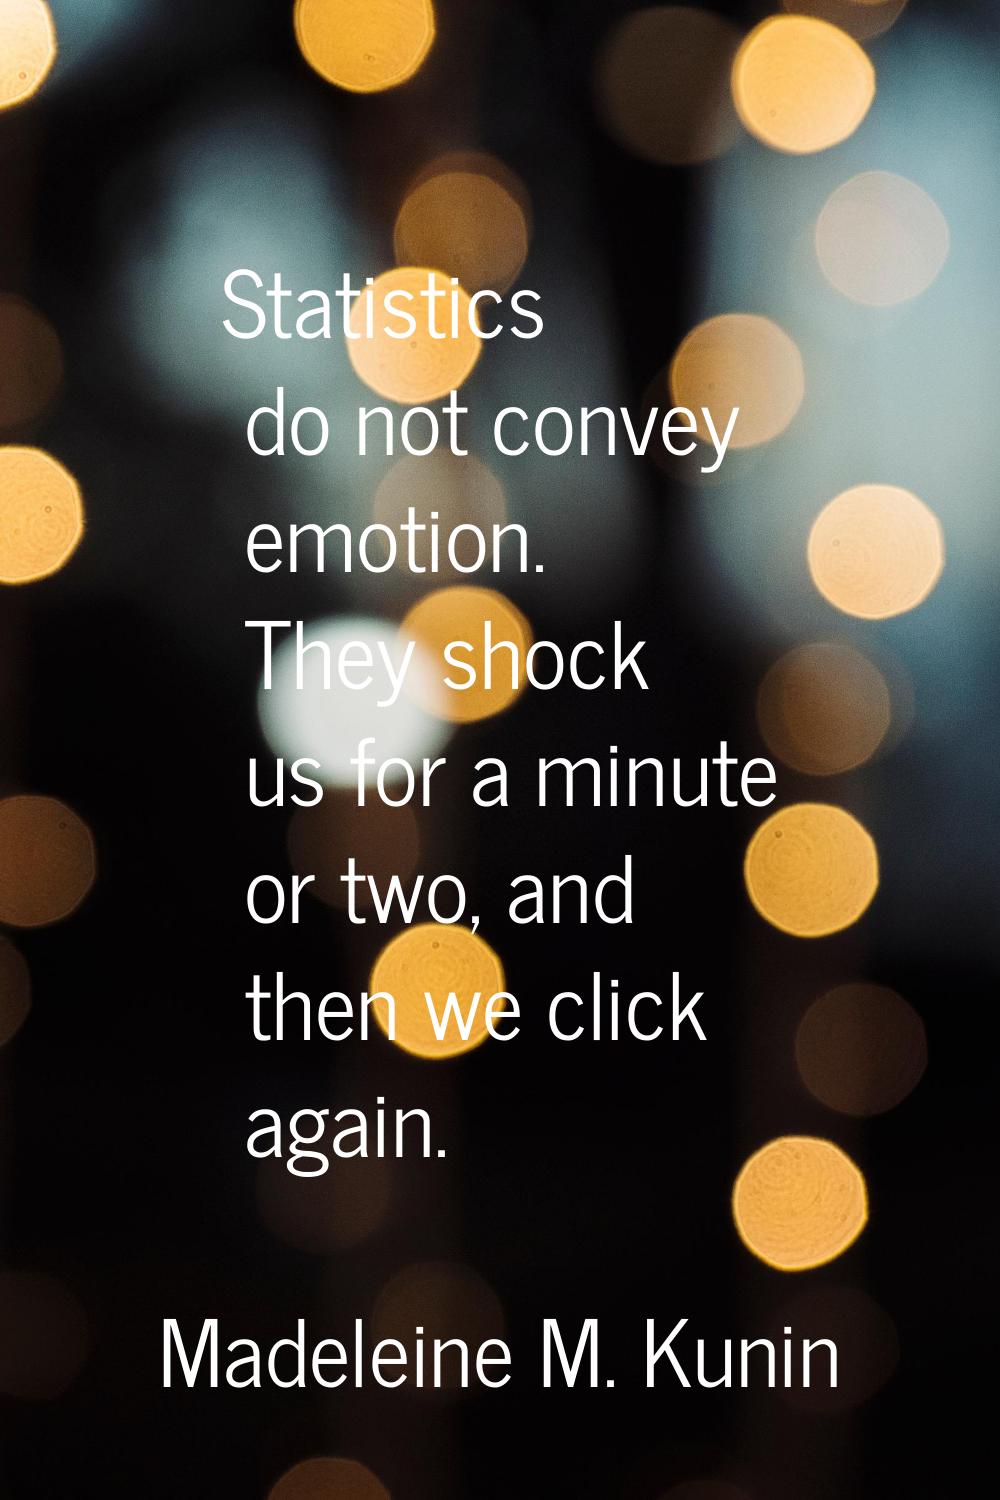 Statistics do not convey emotion. They shock us for a minute or two, and then we click again.